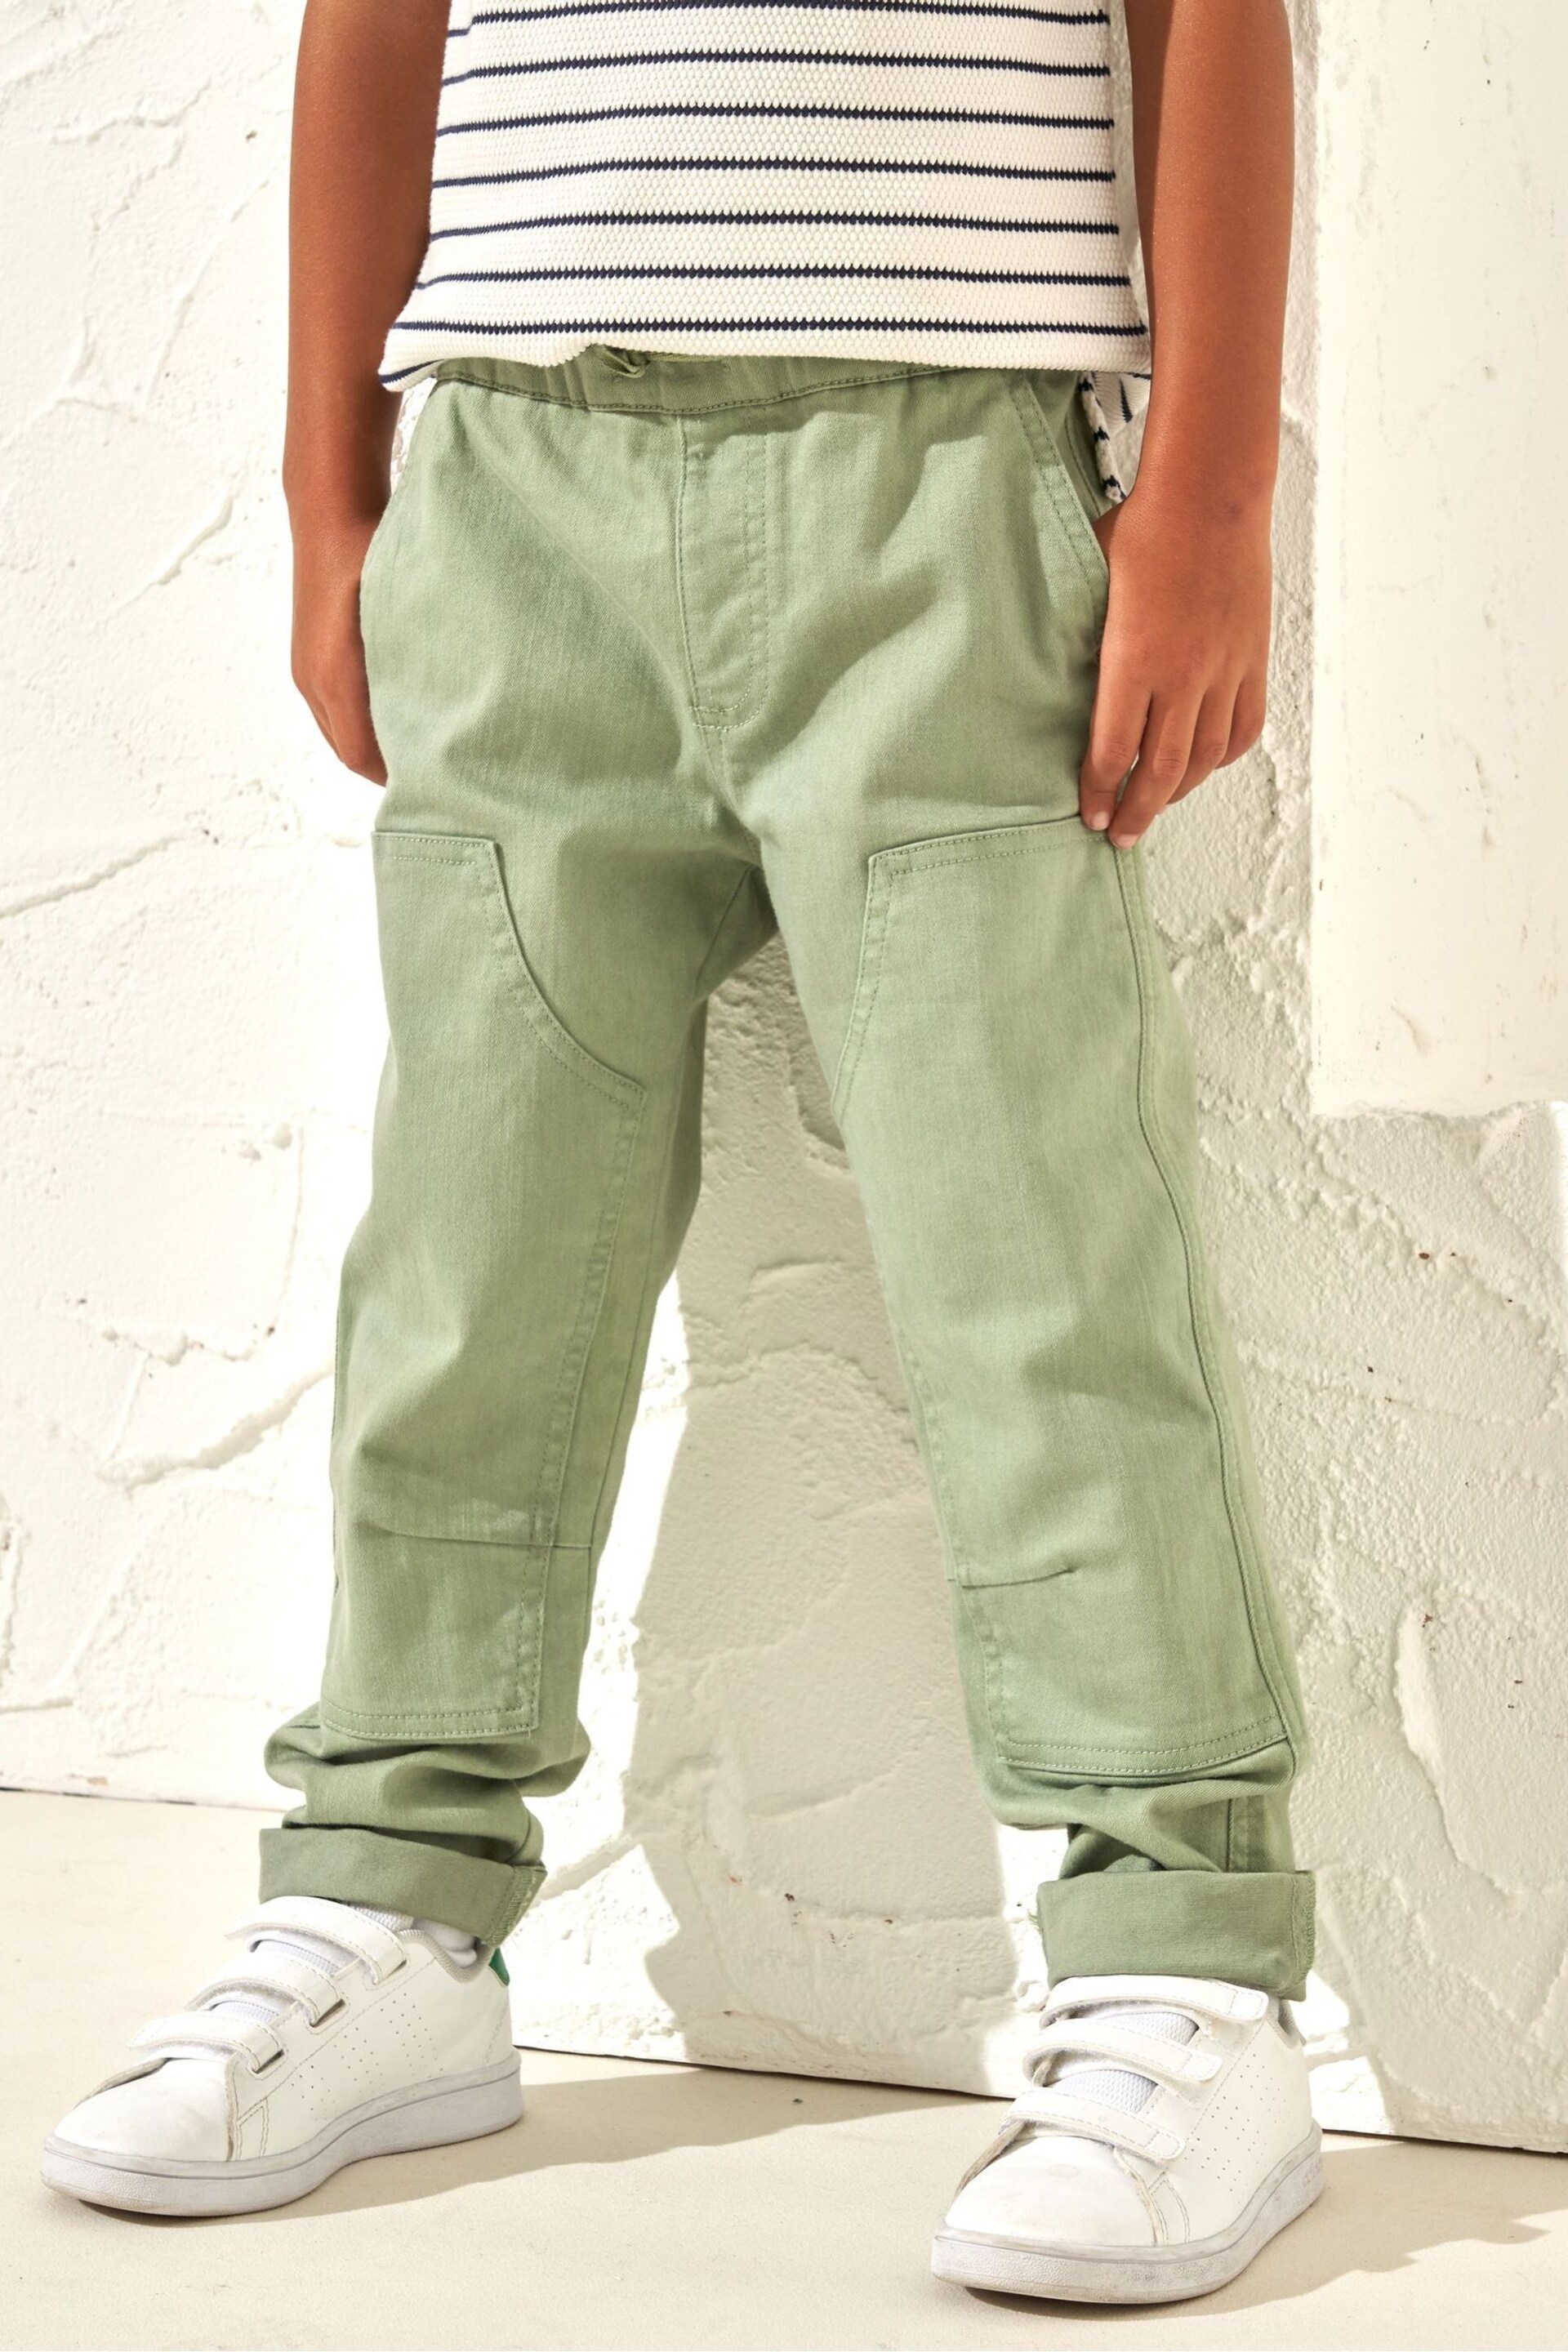 Angel & Rocket Green Jace Stitch Detail Washed Trousers - Image 1 of 5